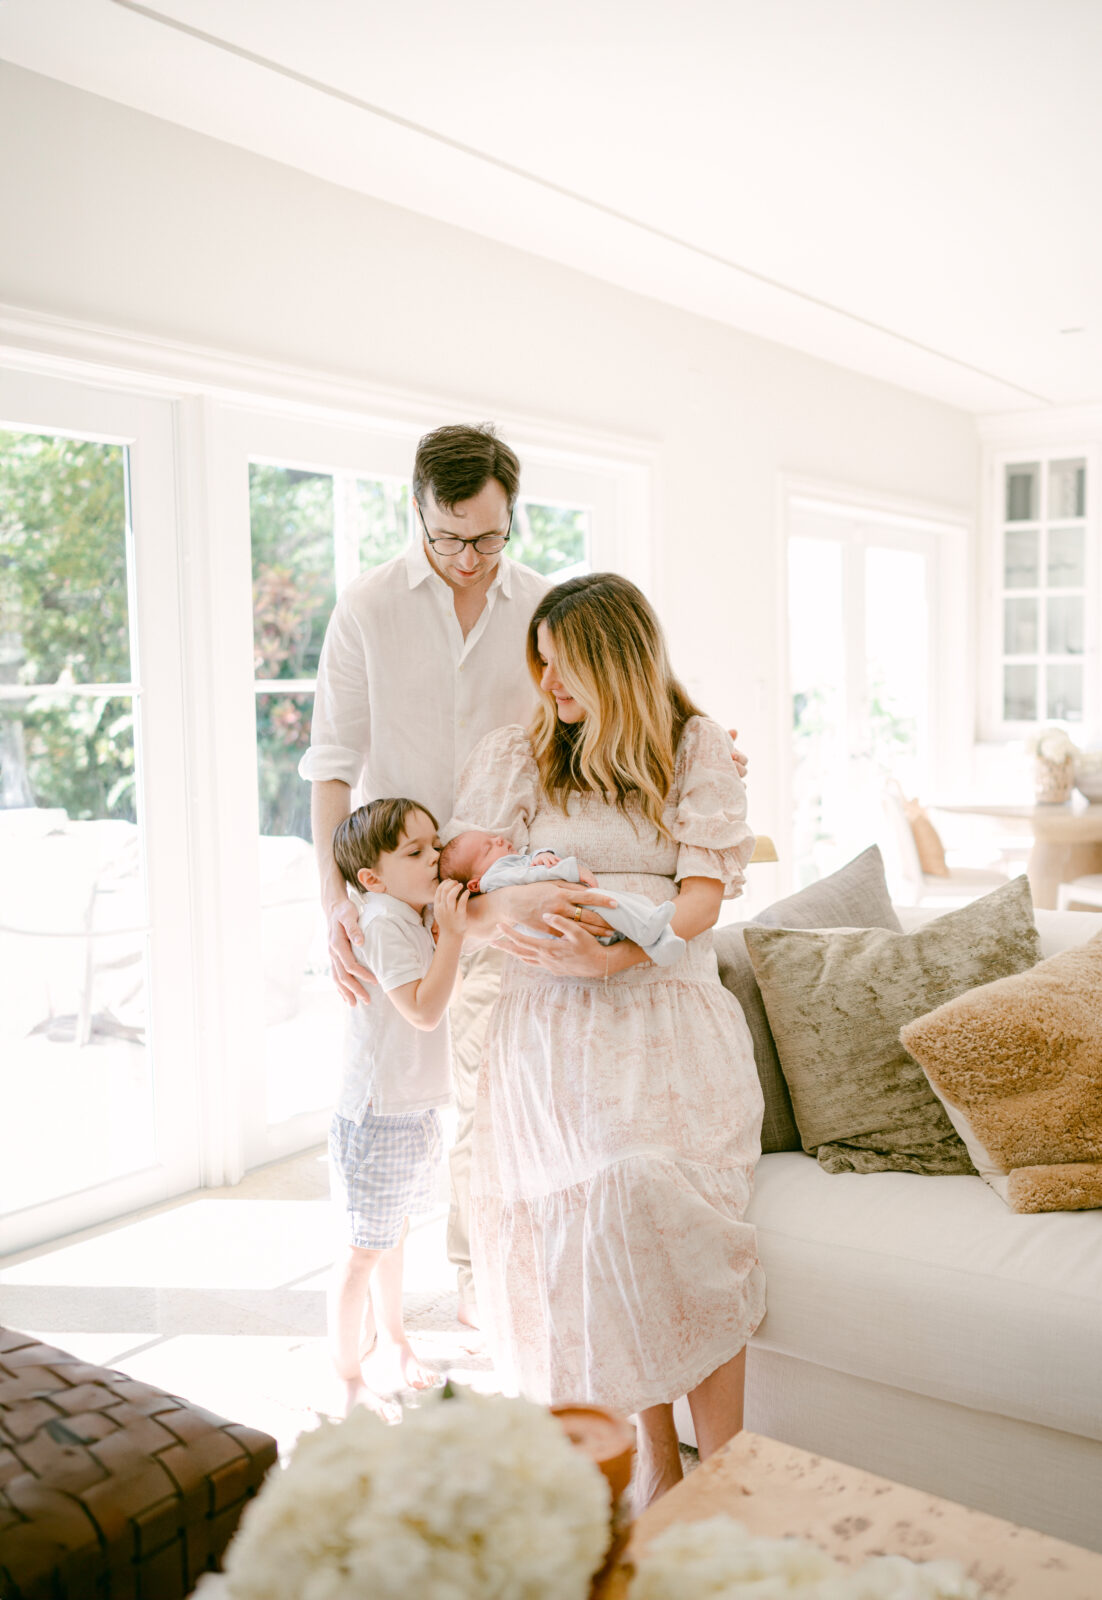 How to prepare your home for your Miami newborn session